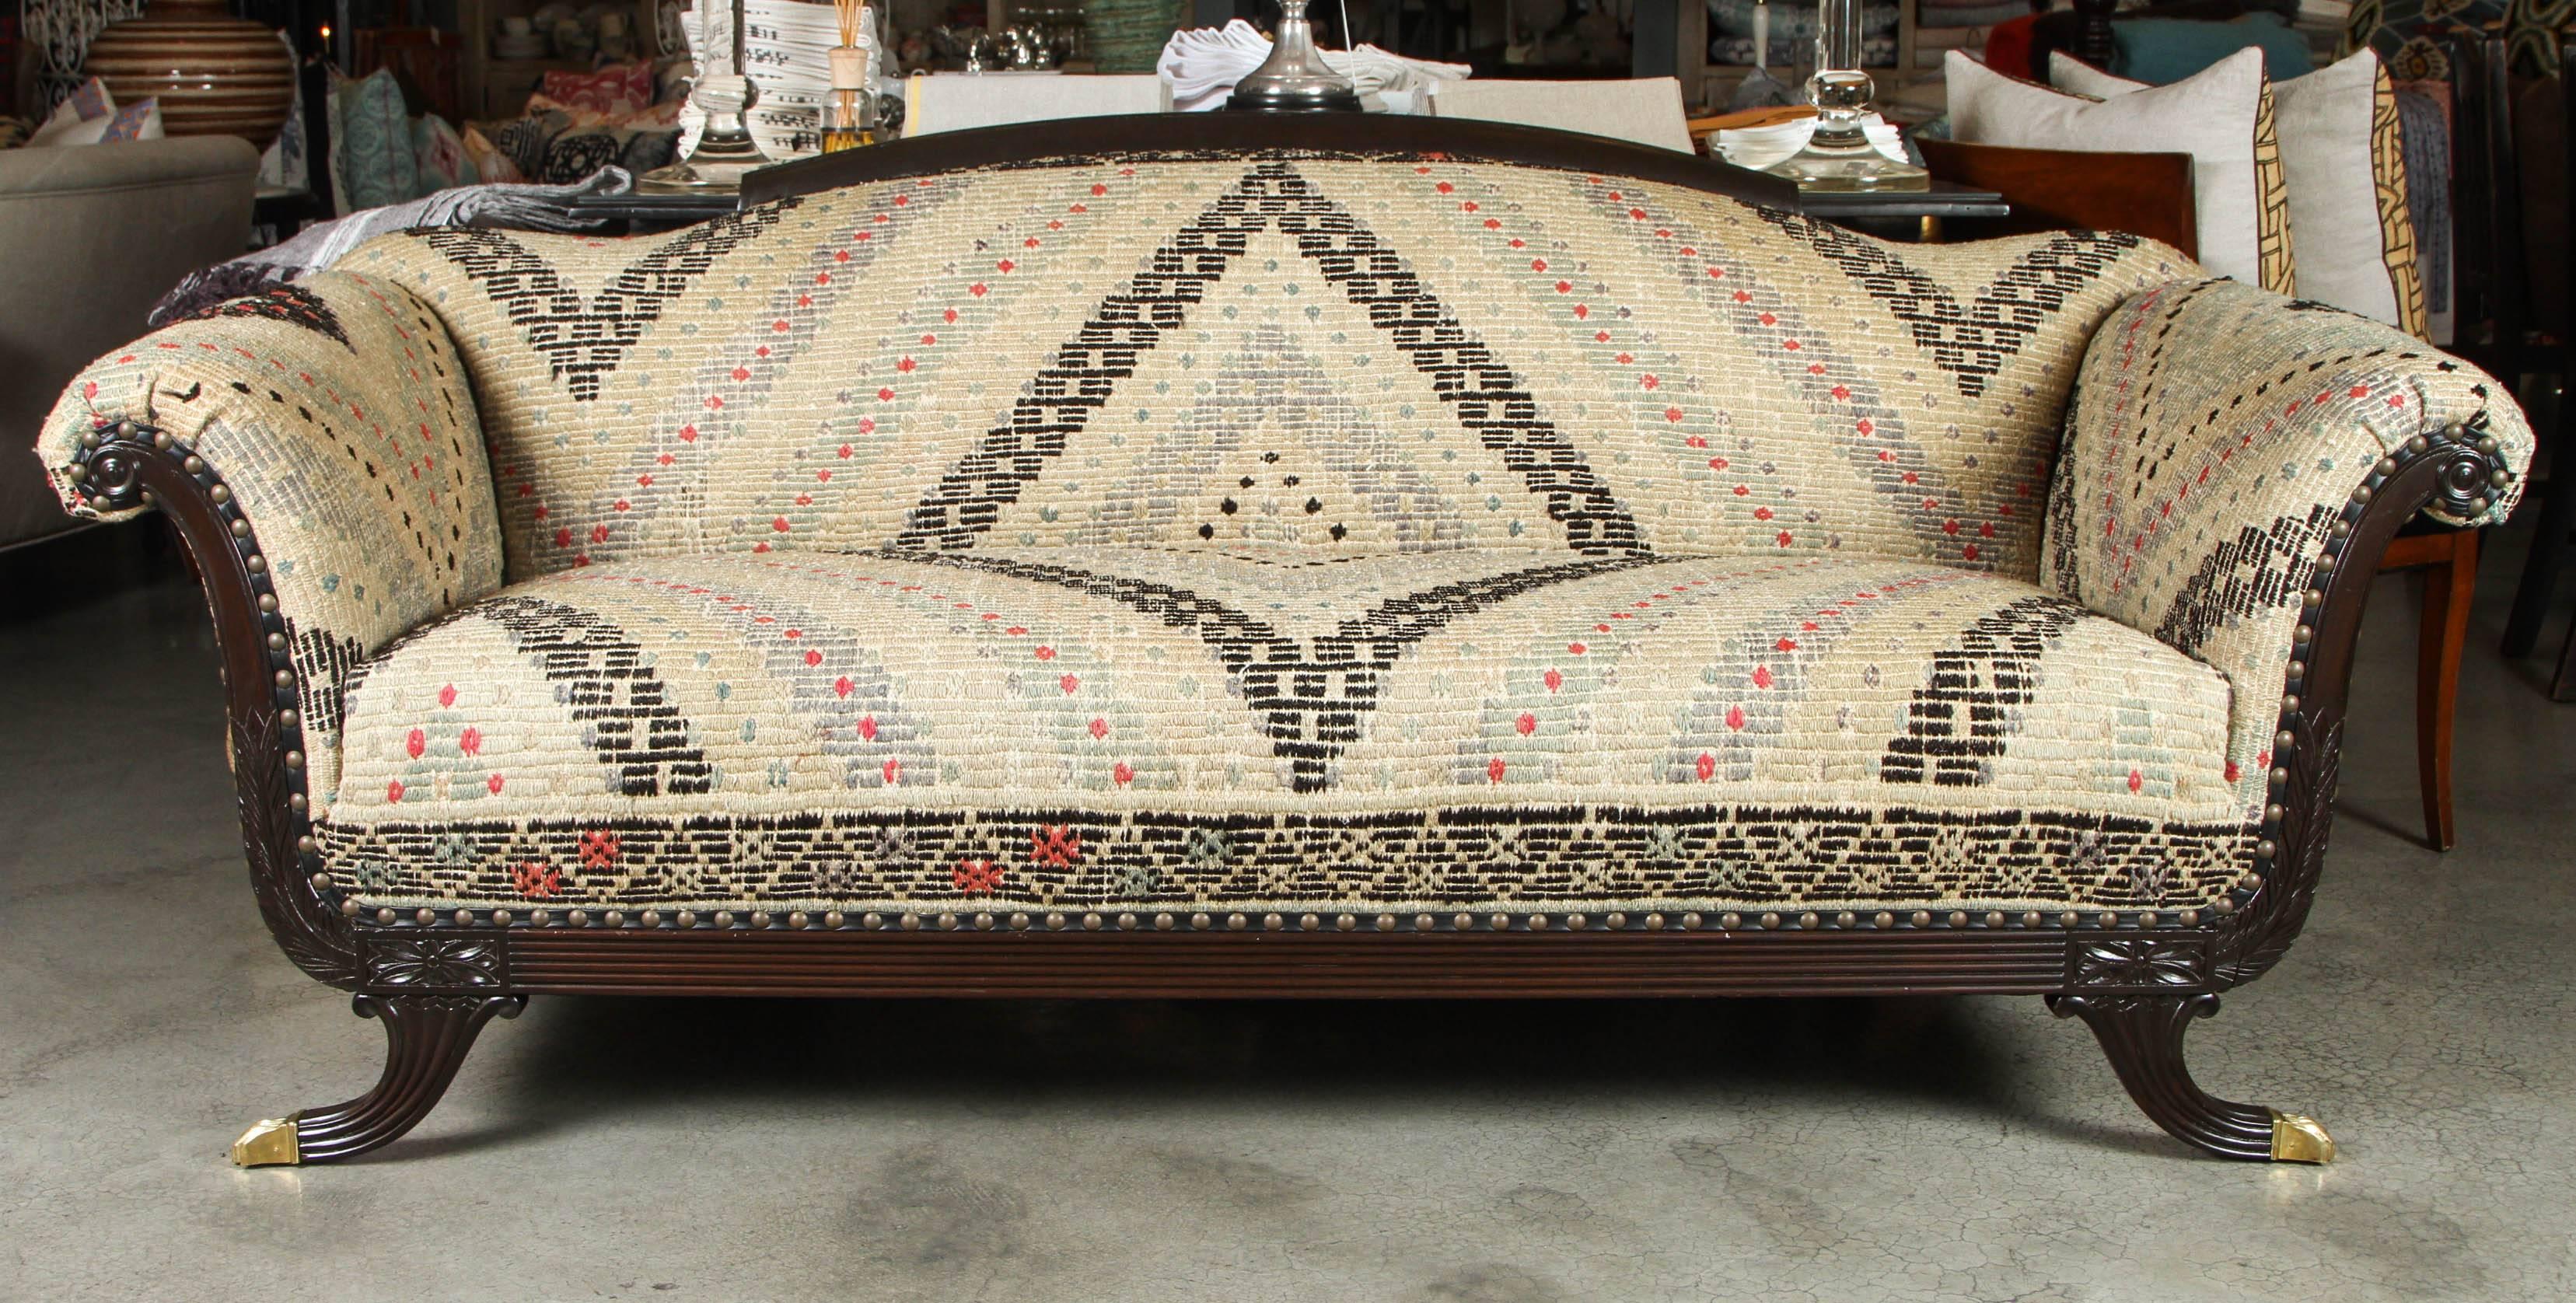 1930s Duncan Phyfe style sofa. The walnut frame is newly refinished and original brass feet are newly polished. All new upholstery in vintage cotton/wool Oushak Jijim rugs from Turkey in an antique/vintage wash.

Seat Height 18